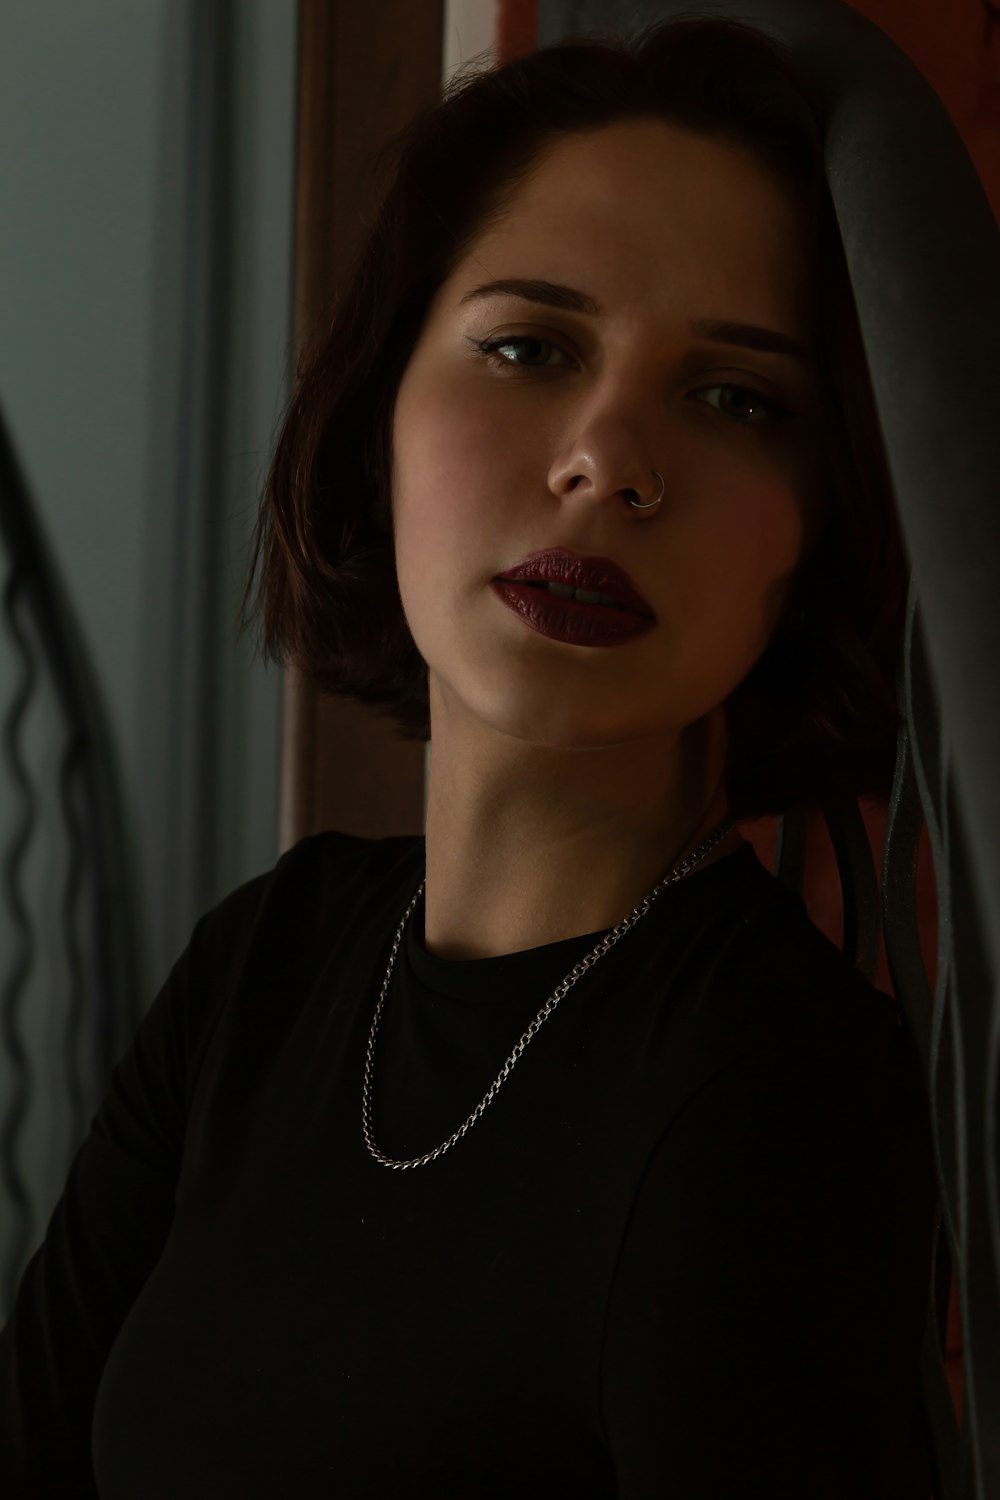 a woman wearing a black shirt and a necklace